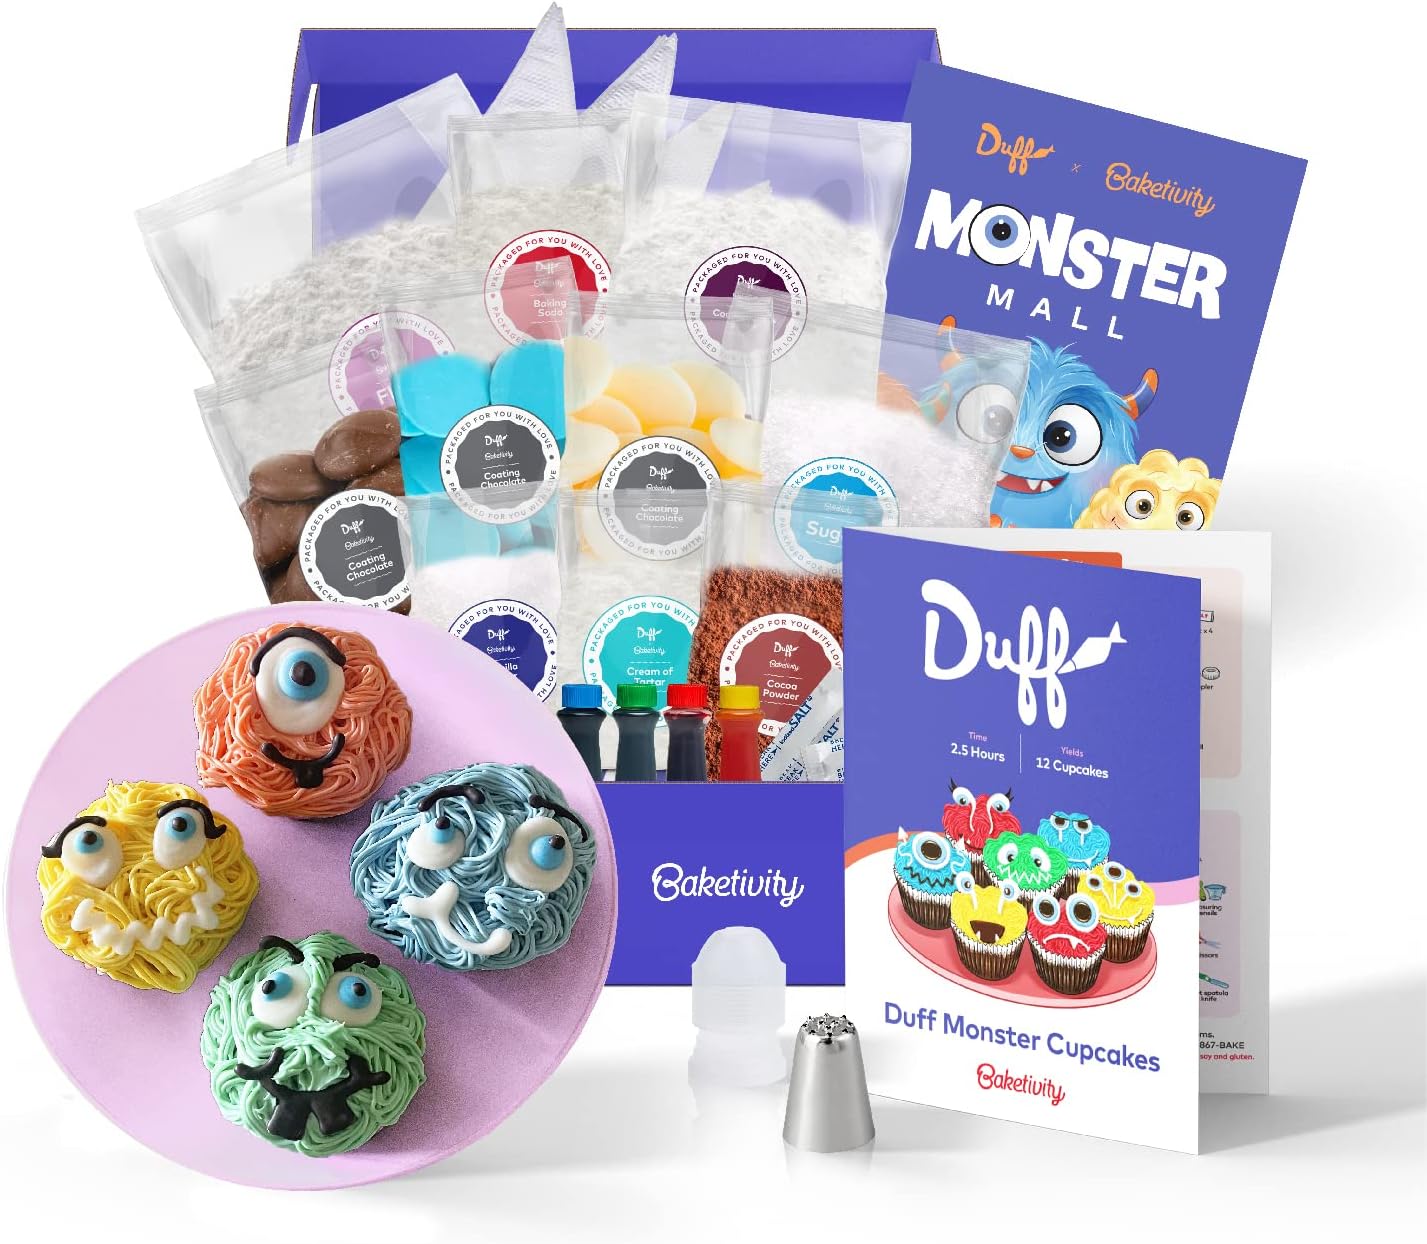 Duff Monster Cupcakes Baking Kit - Duff Goldman x Baketivity Kits for Kids, Teens &#x26; Adults with Pre-Measured Ingredients &#x26; Kid-Friendly Instructions - DIY Cupcake Mix Baking Set - Family Activity Gift